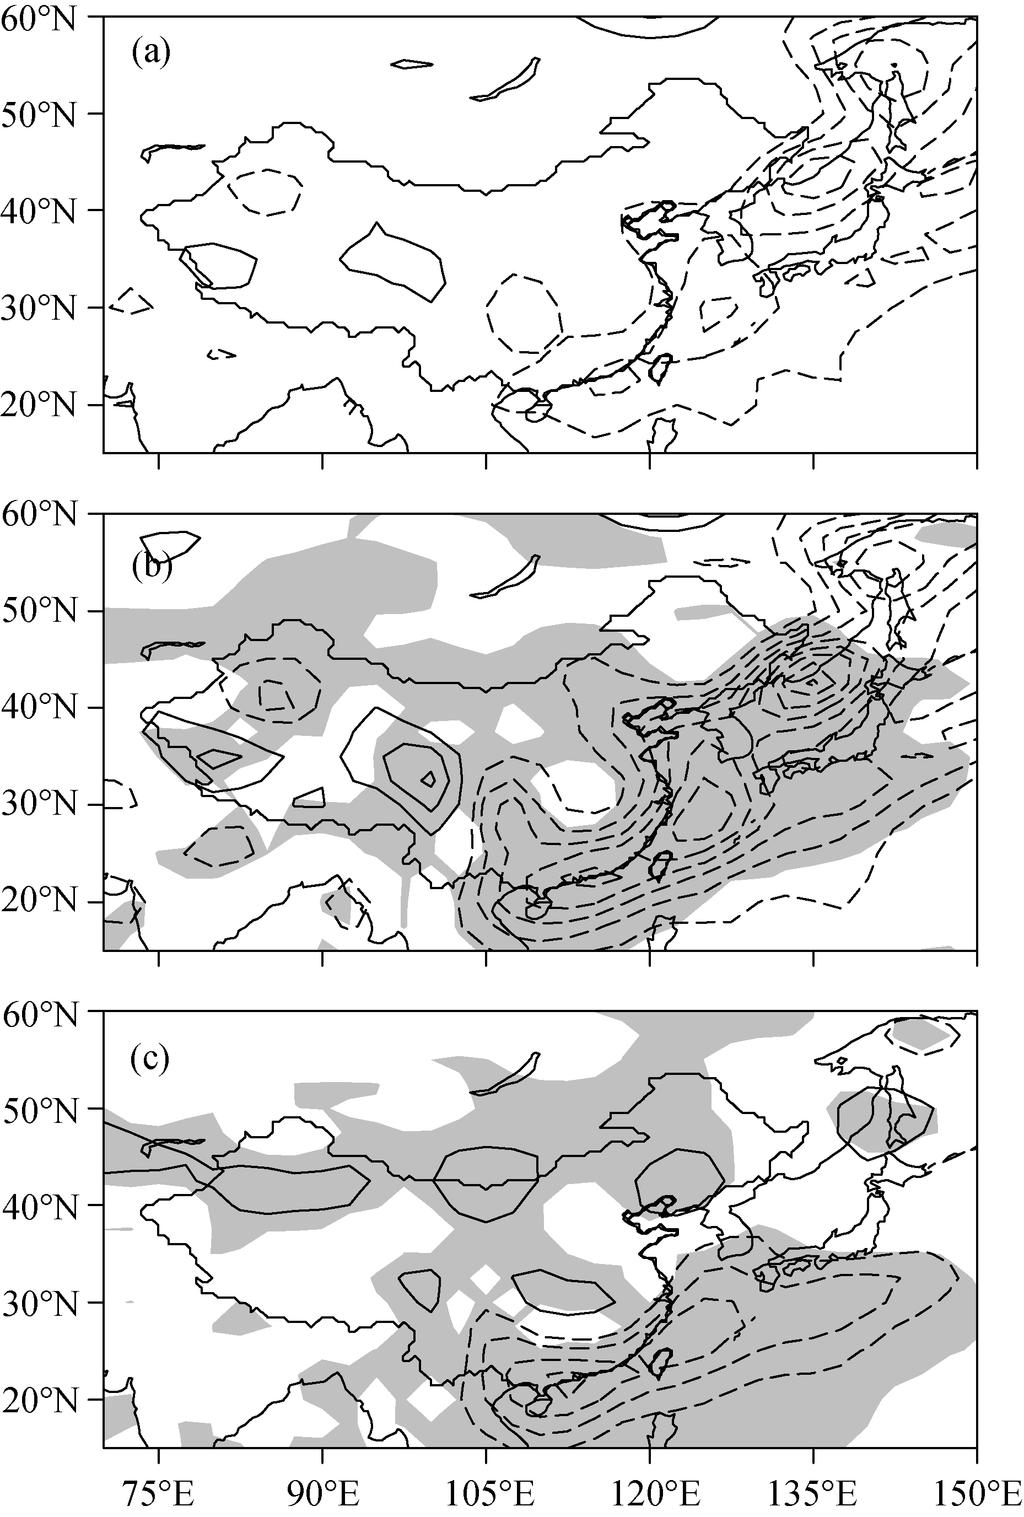 238 ATMOSPHERIC AND OCEANIC SCIENCE LETTERS VOL. 4 Figure 2 (a) Multi-year (1951 2008) mean winter (November to March) horizontal temperature advection (K d 1 ) at 1000 hpa.